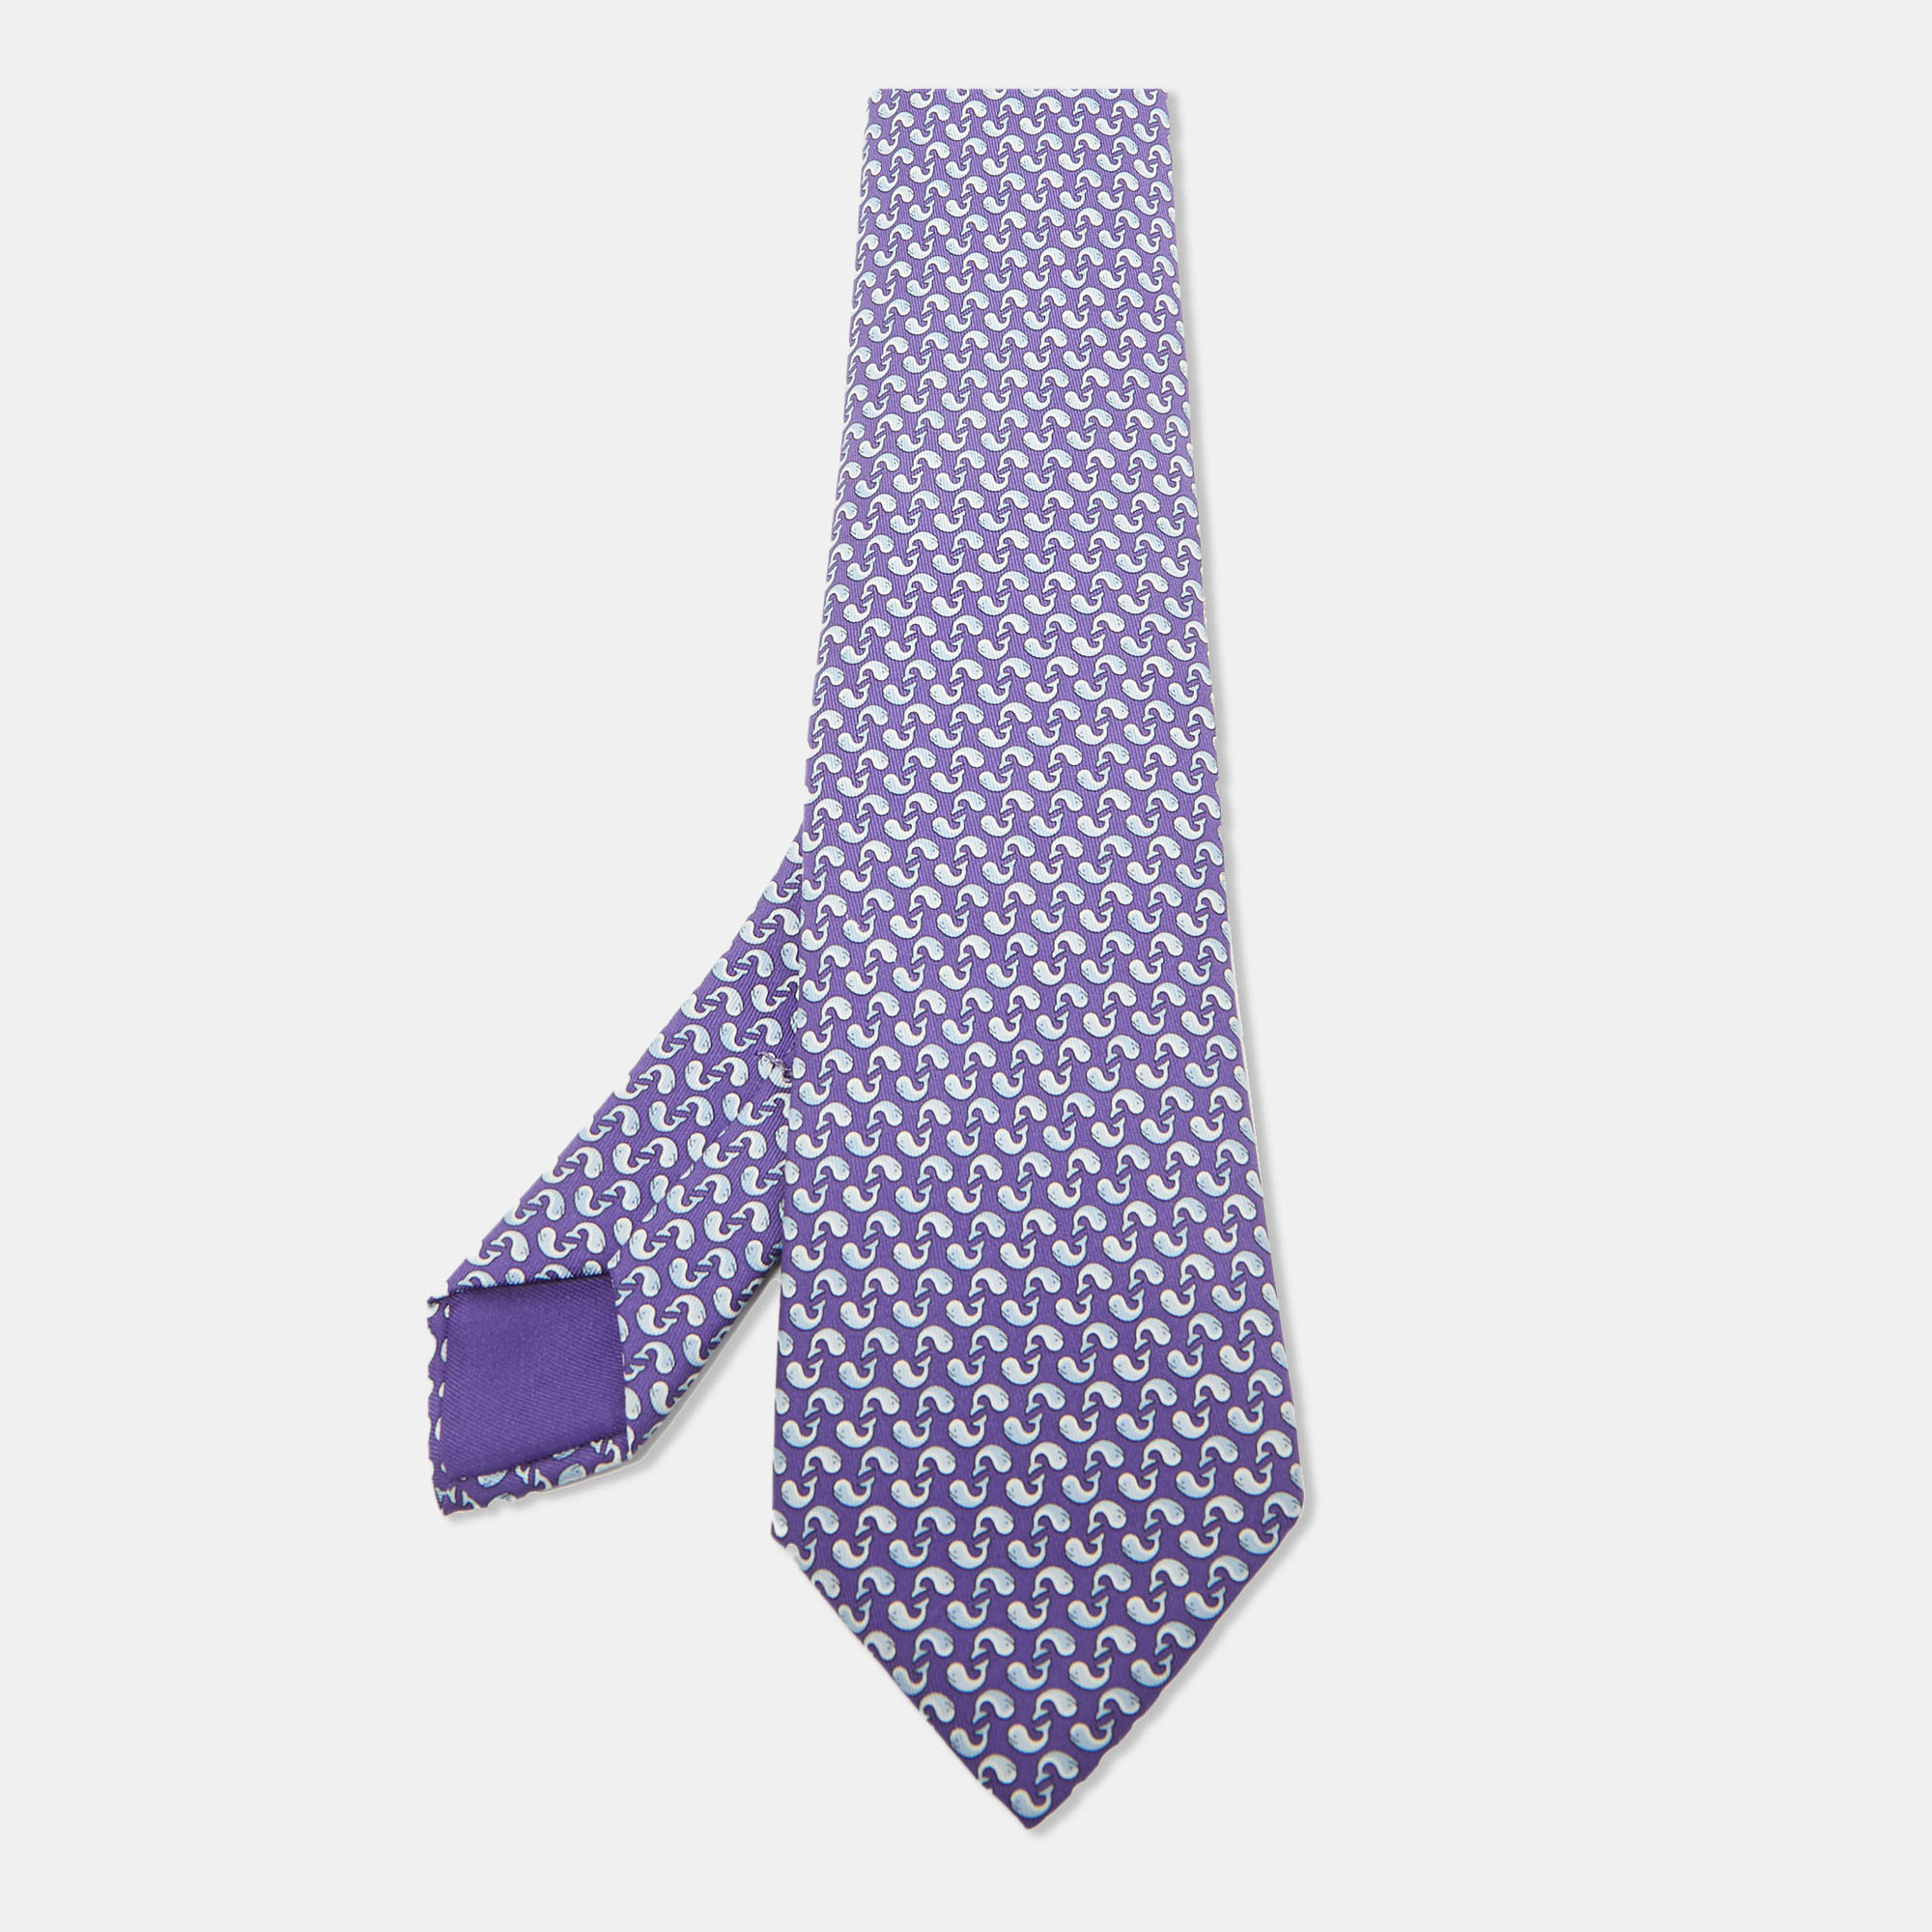 This Hermès tie is a perfect formal accessory that has a sharp and modern appeal. Made from luxurious materials it features intricate patterns and the brand label is neatly stitched at the back. It is sure to add oodles of style to your blazers.